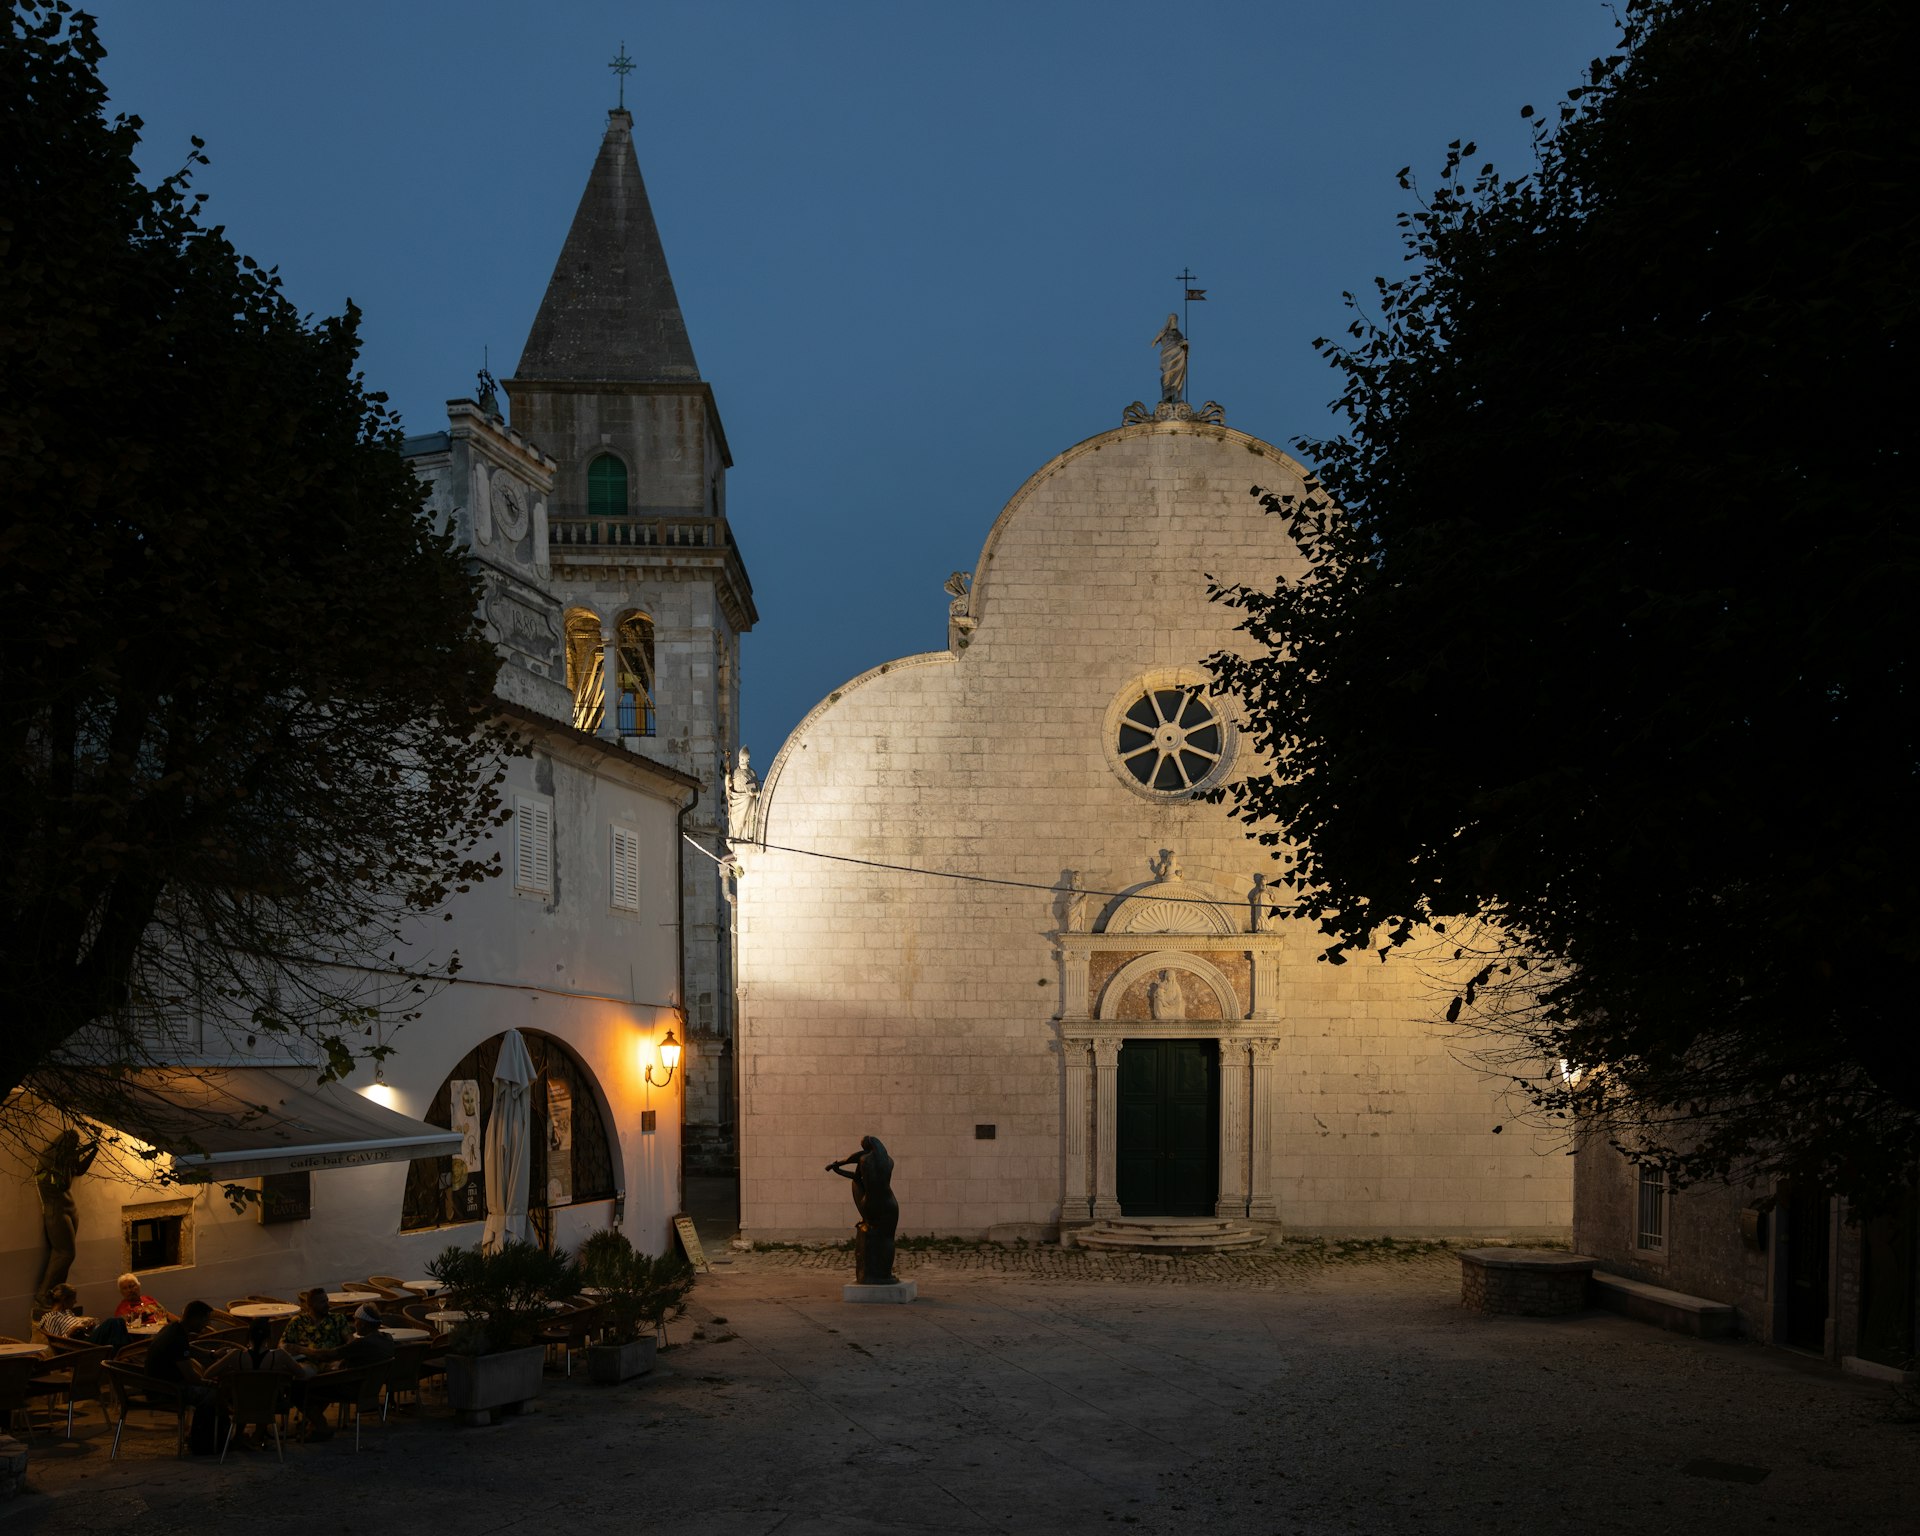 Main town square and facade of the church in Osor, Cres, Croatia